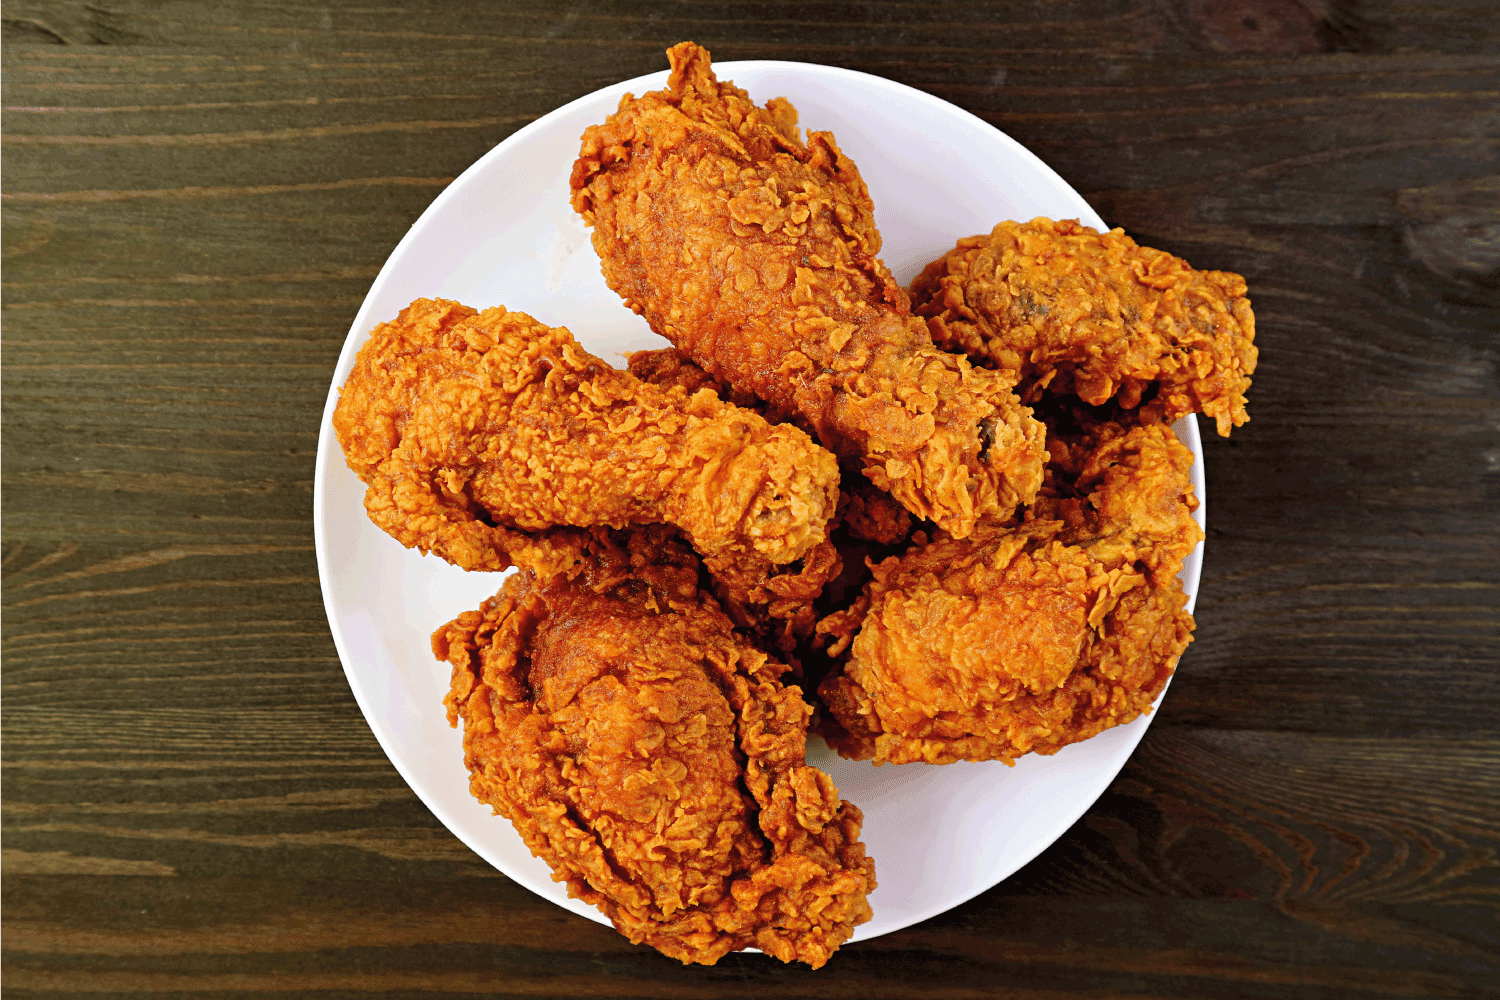 Plate of Delectable Golden Brown Crispy Fried Chickens on Wooden Background